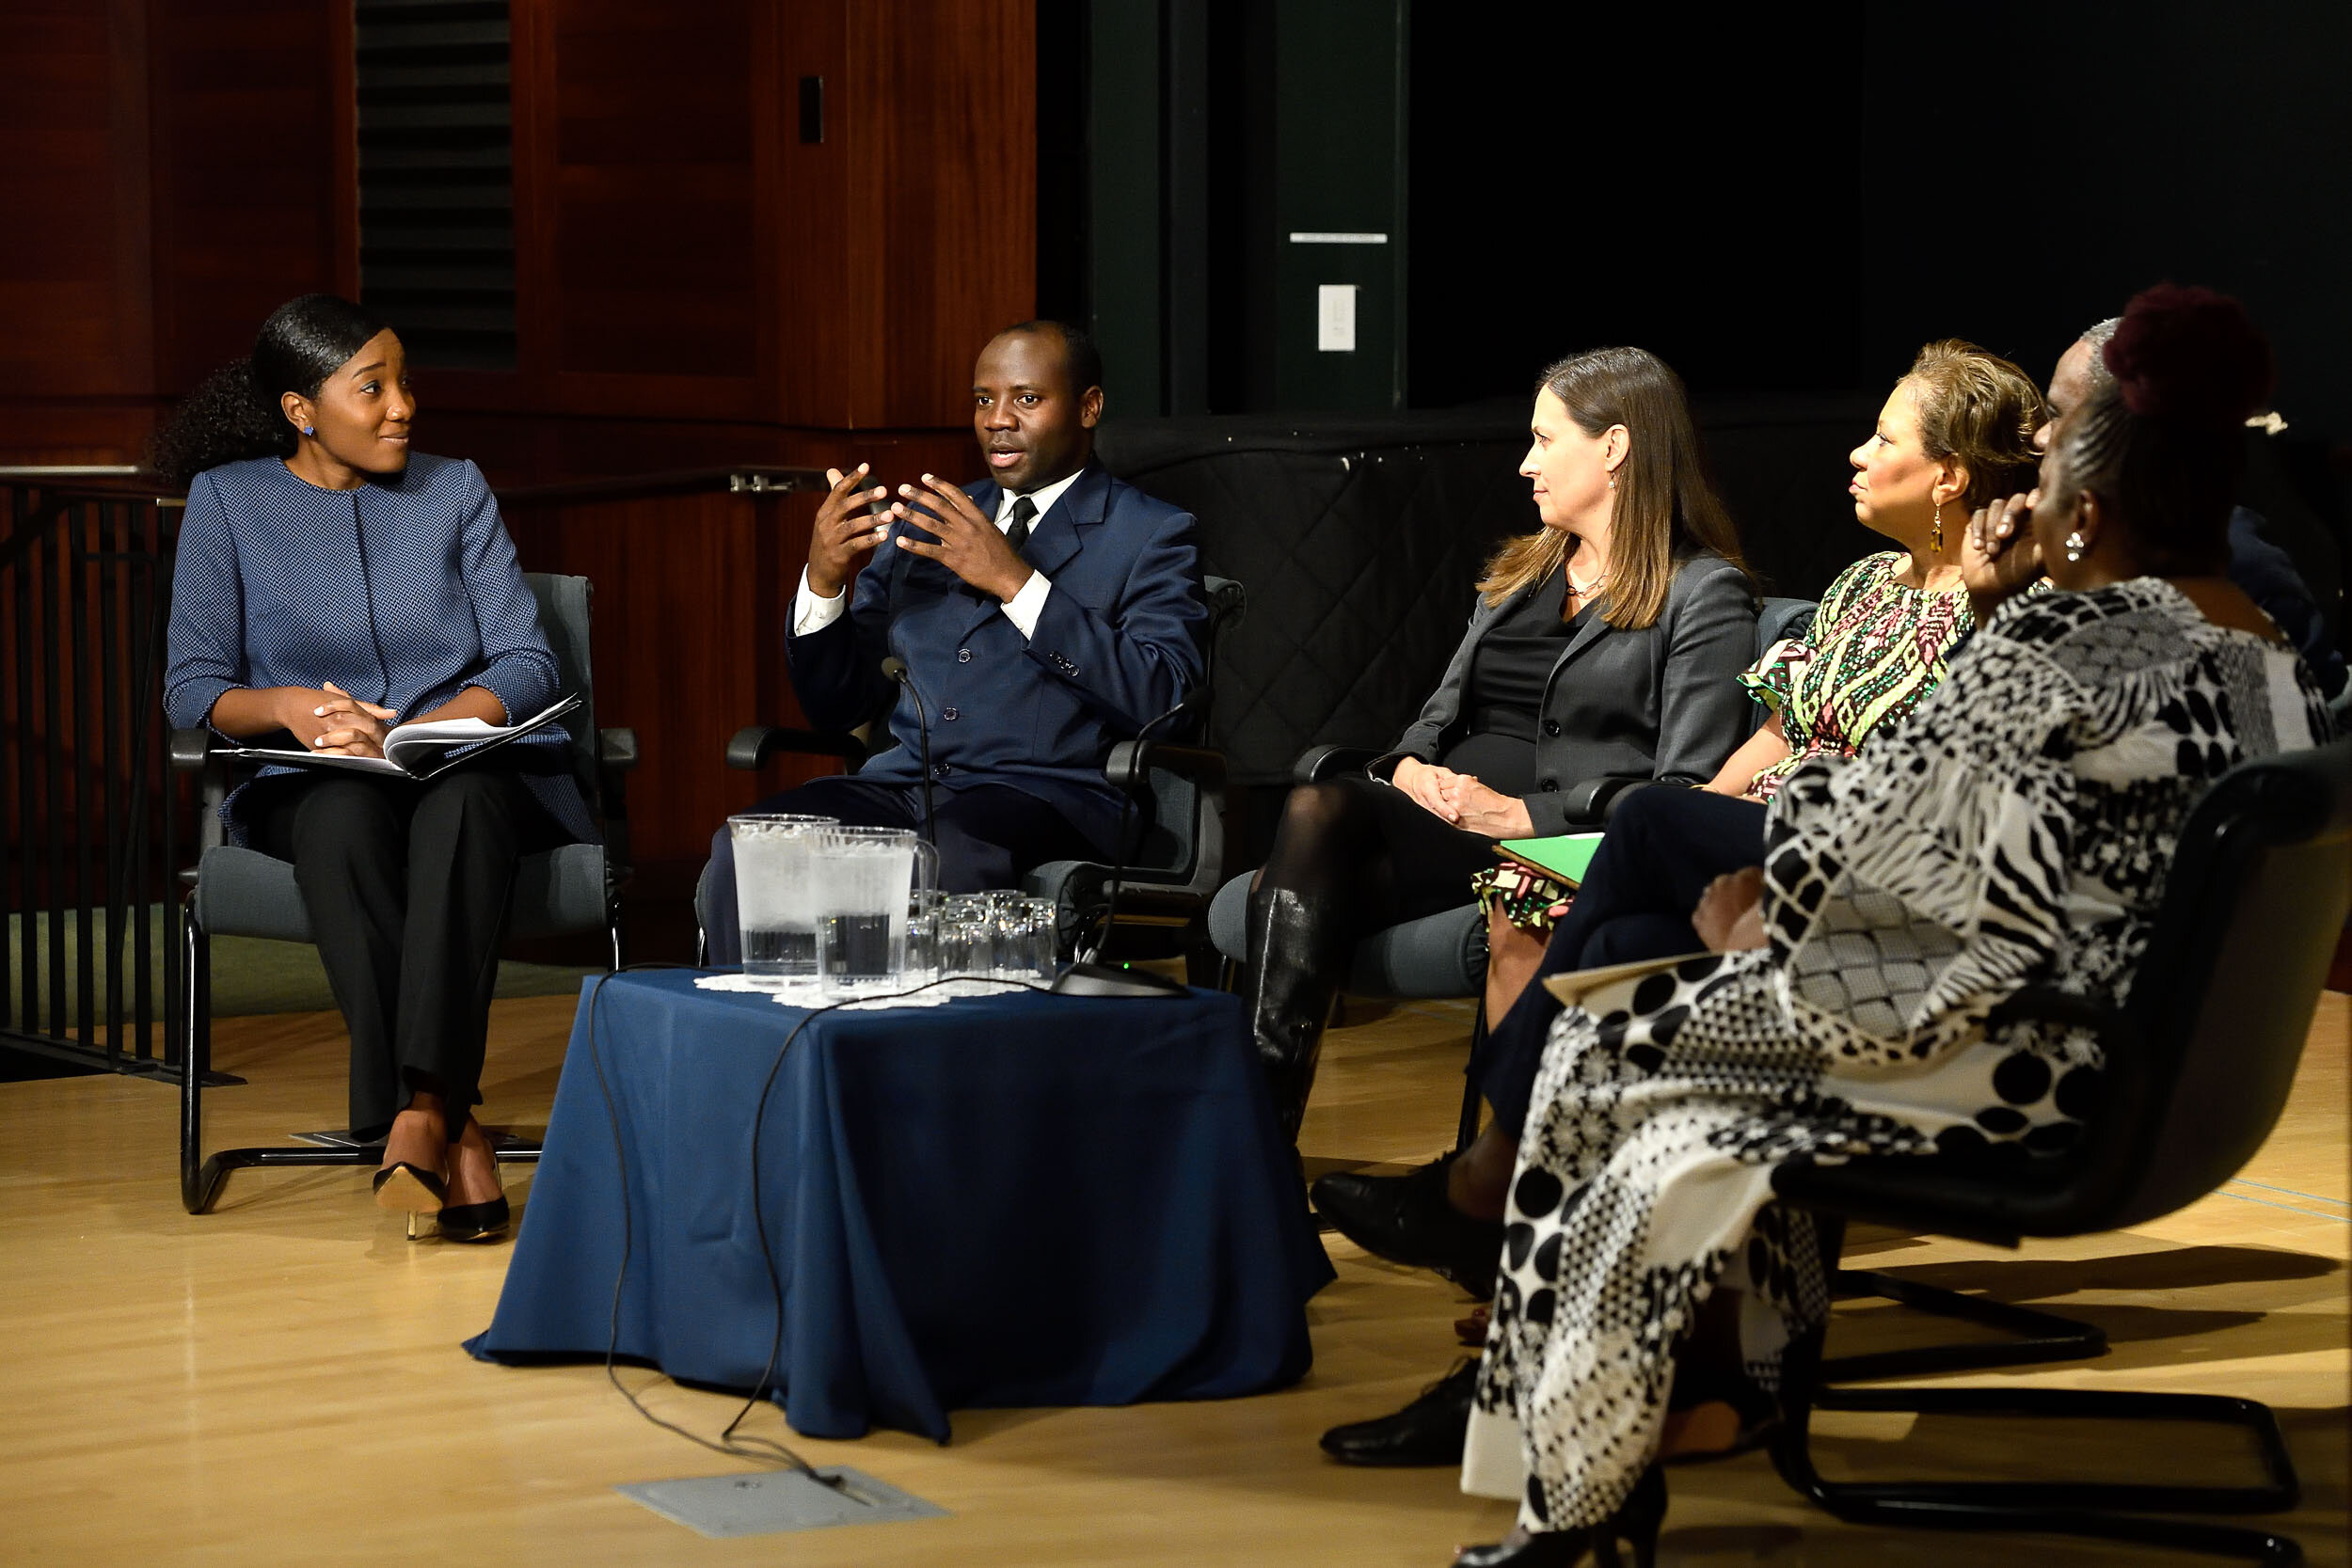  Special Event Session: Local Global Learning Panel in Baltimore, April 2019. Photo by Will Kirk for JHU 